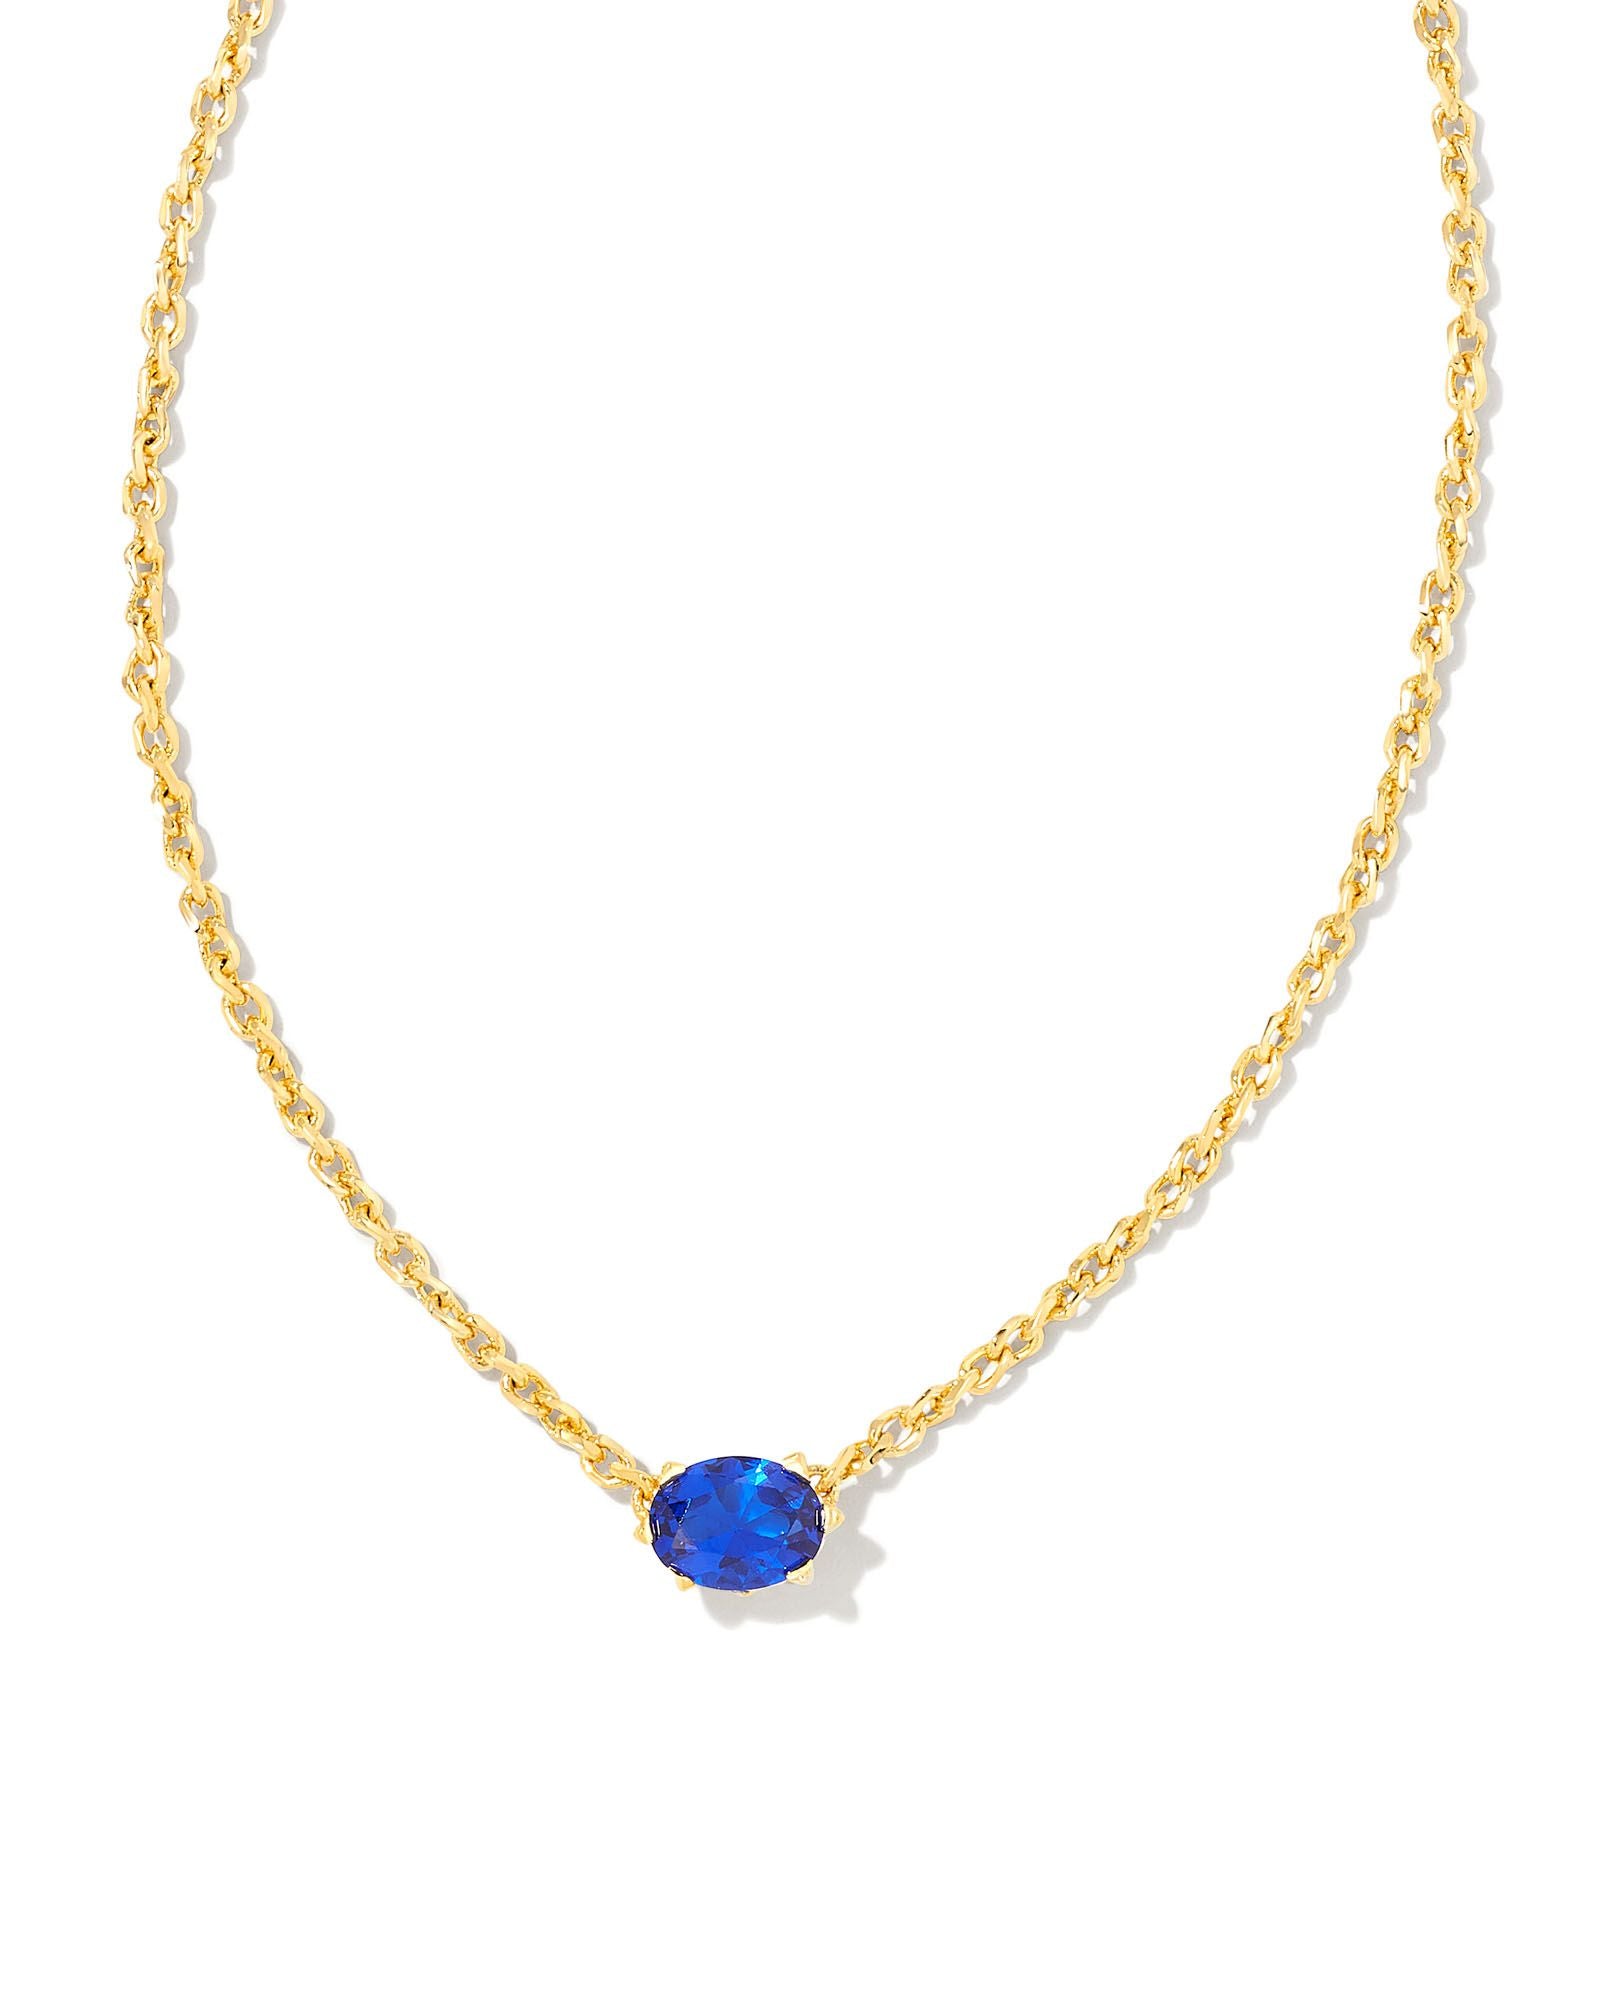 Kendra Scott Cailin Crystal Pendant Necklace In Gold Blue Crystal.